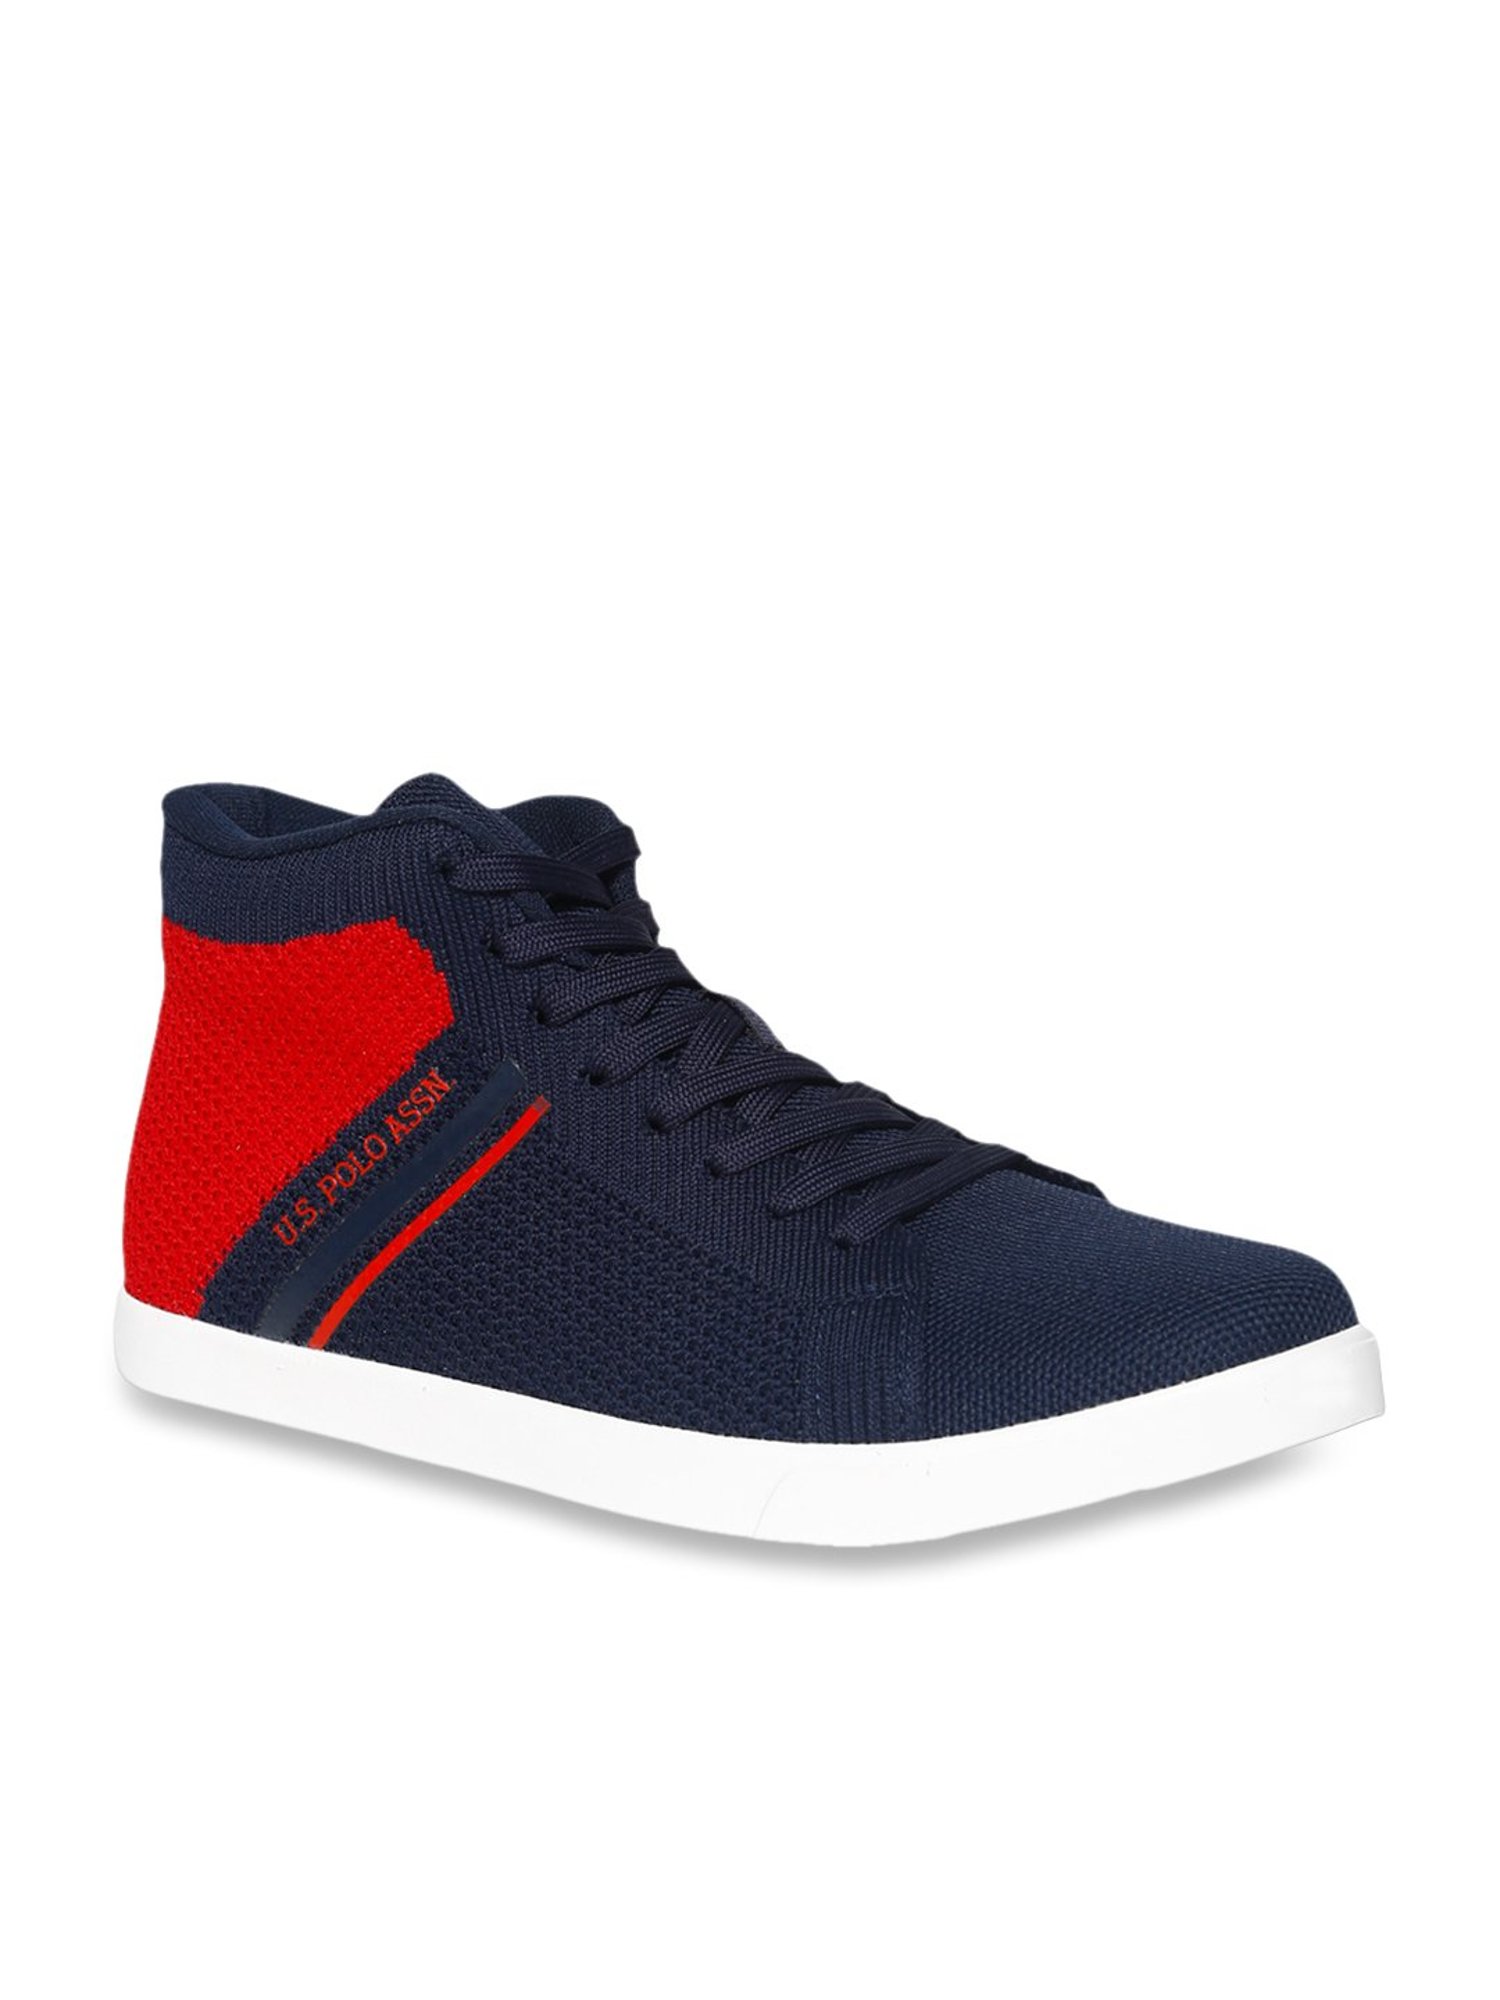 us polo high ankle shoes